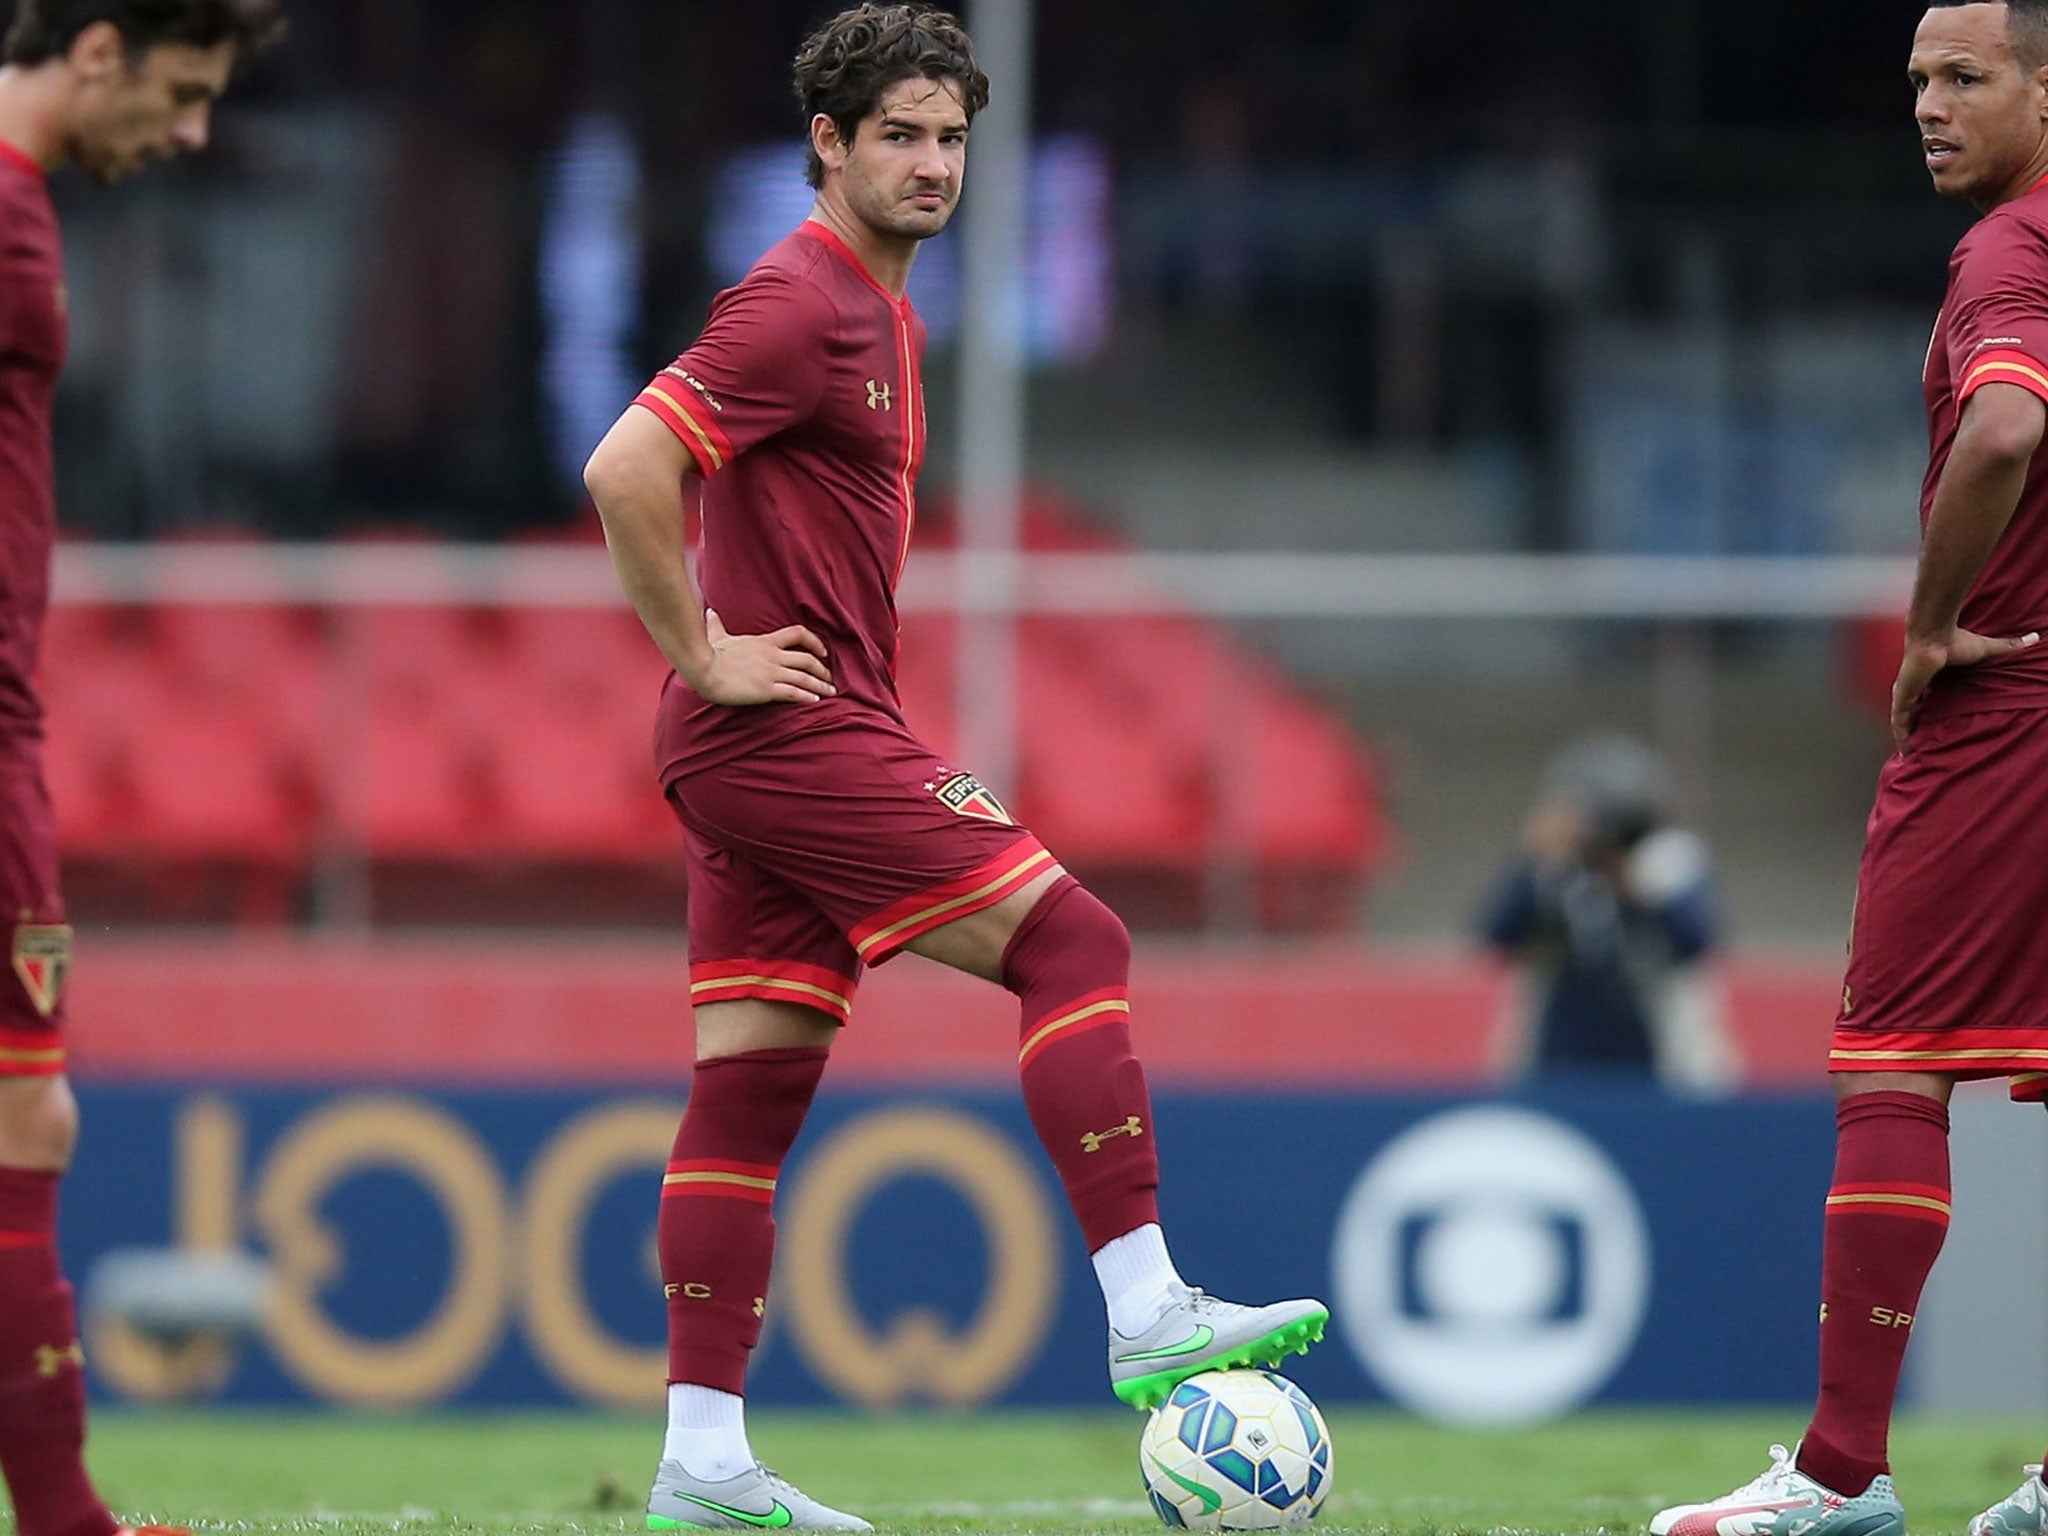 Alexandre Pato has been linked with a move to both Chelsea and Liverpool